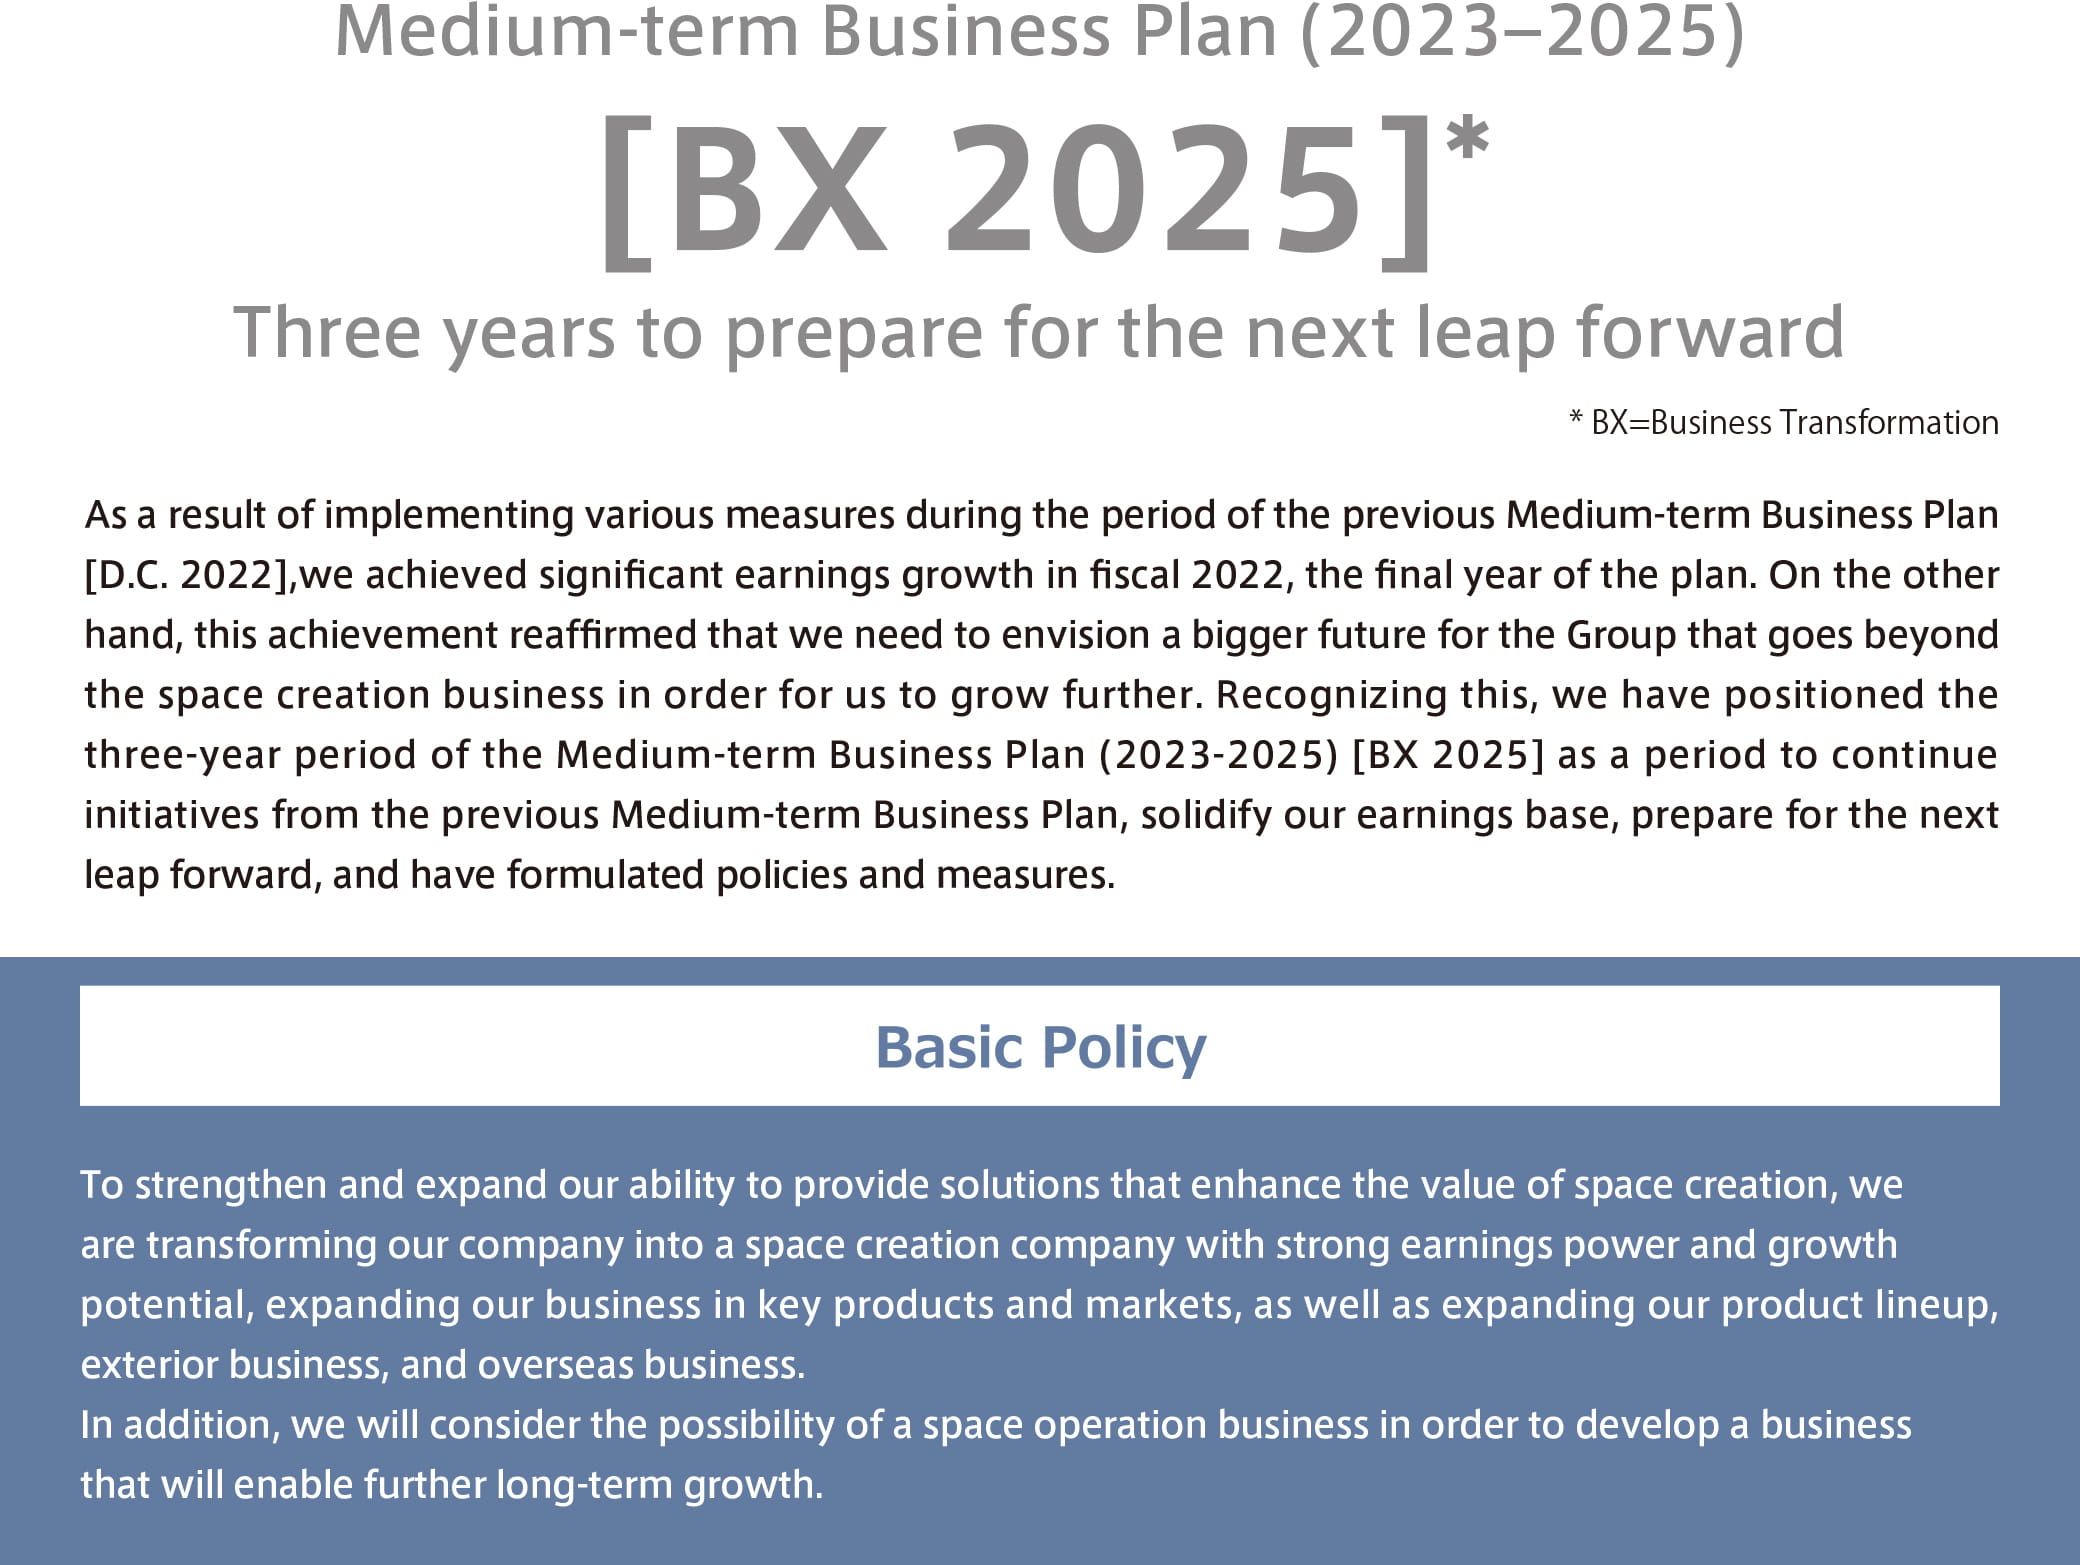 Medium-term Business Plan (2023–2025)[BX 2025]: To strengthen and expand our ability to provide solutions that enhance the value of space creation, we are transforming our company into a space creation company with strong earnings power and growth potential, expanding our business in key products and markets, as well as expanding our product lineup, exterior business, and overseas business.<br>In addition, we will consider the possibility of a space operation business in order to develop a business that will enable further long-term growth. * Three years to prepare for the next leap forward *BX=Business Transformation